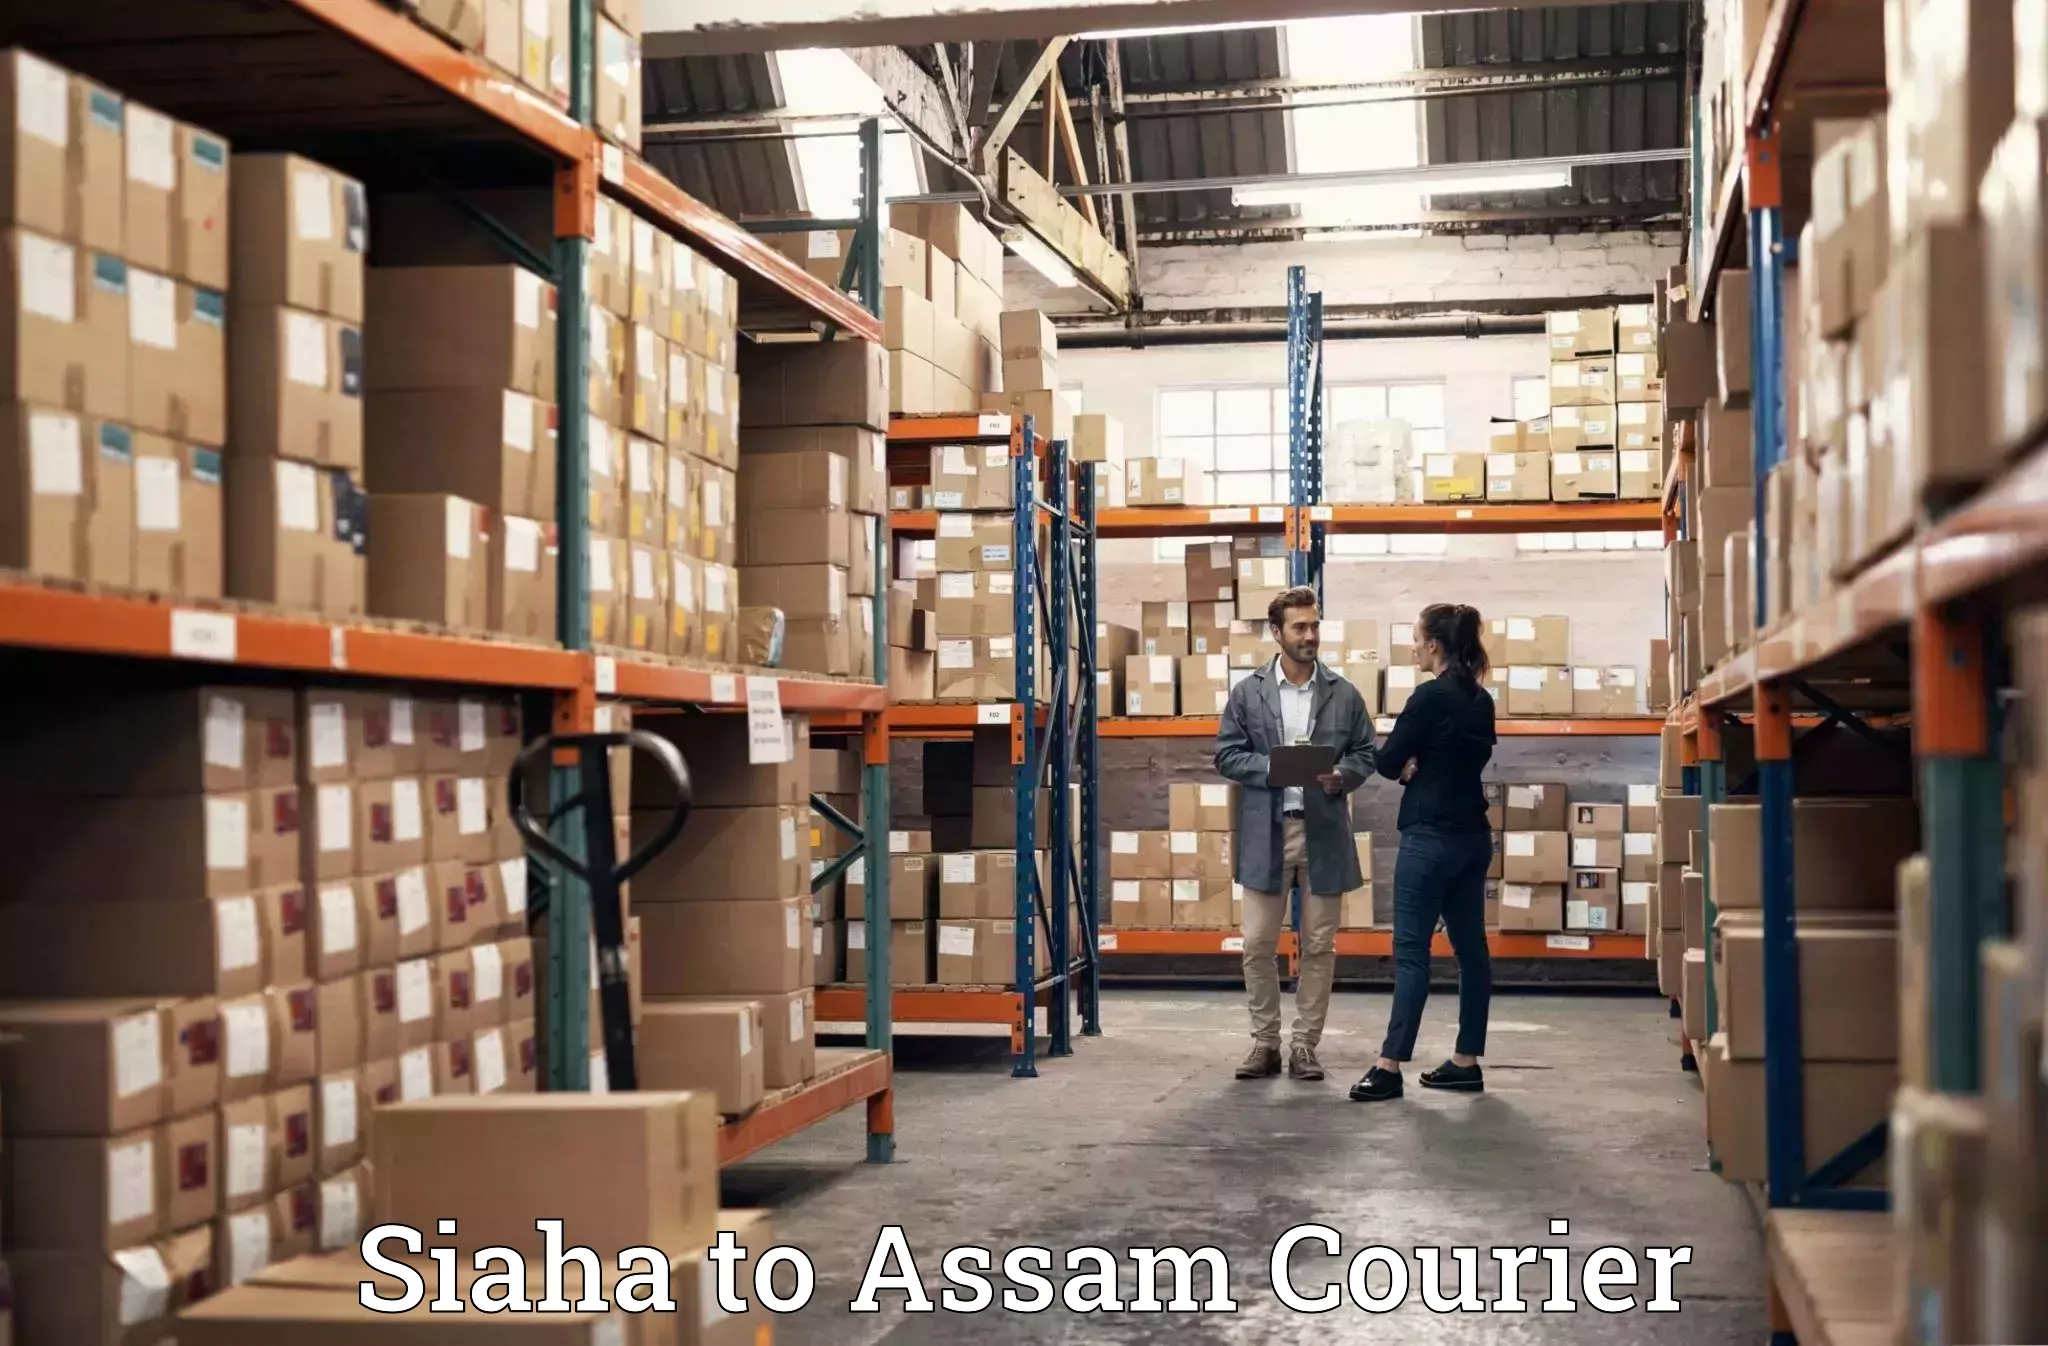 Furniture transport specialists Siaha to Lala Assam